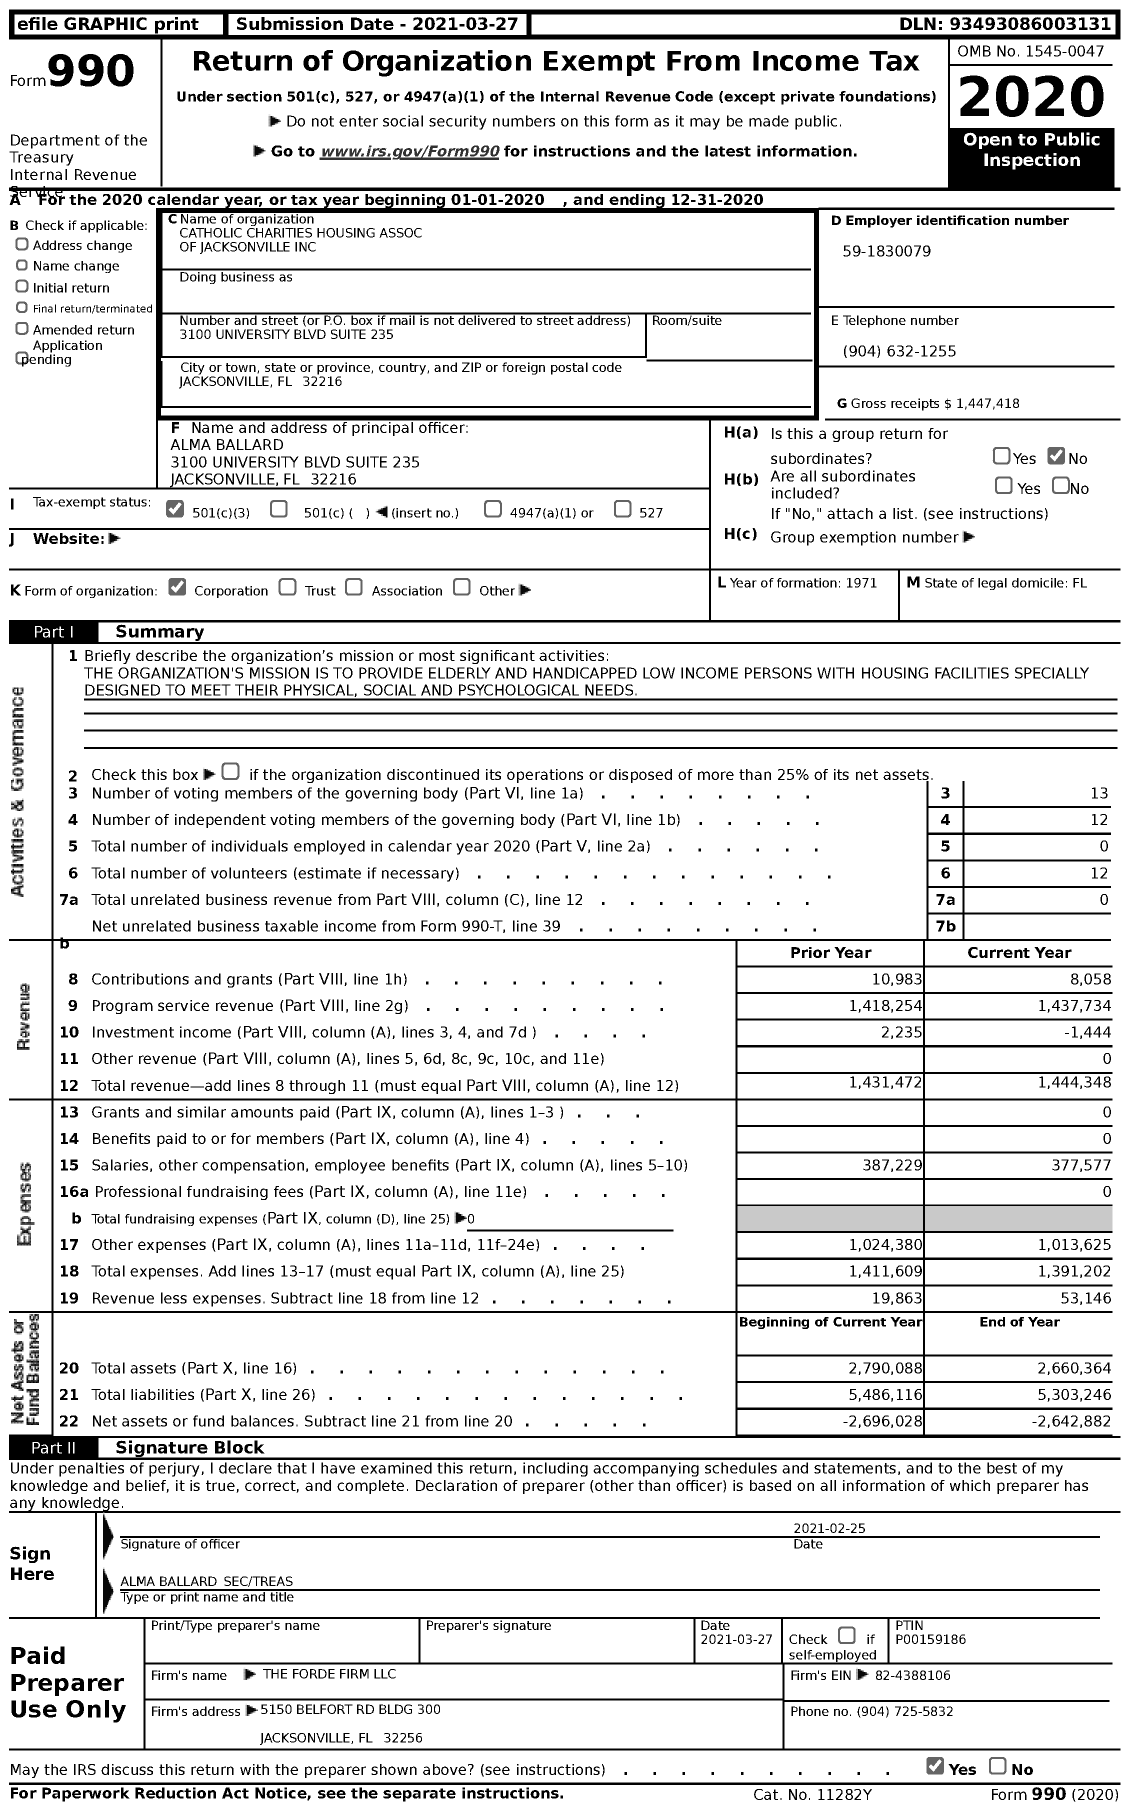 Image of first page of 2020 Form 990 for Catholic Charities Housing Association of Jacksonville